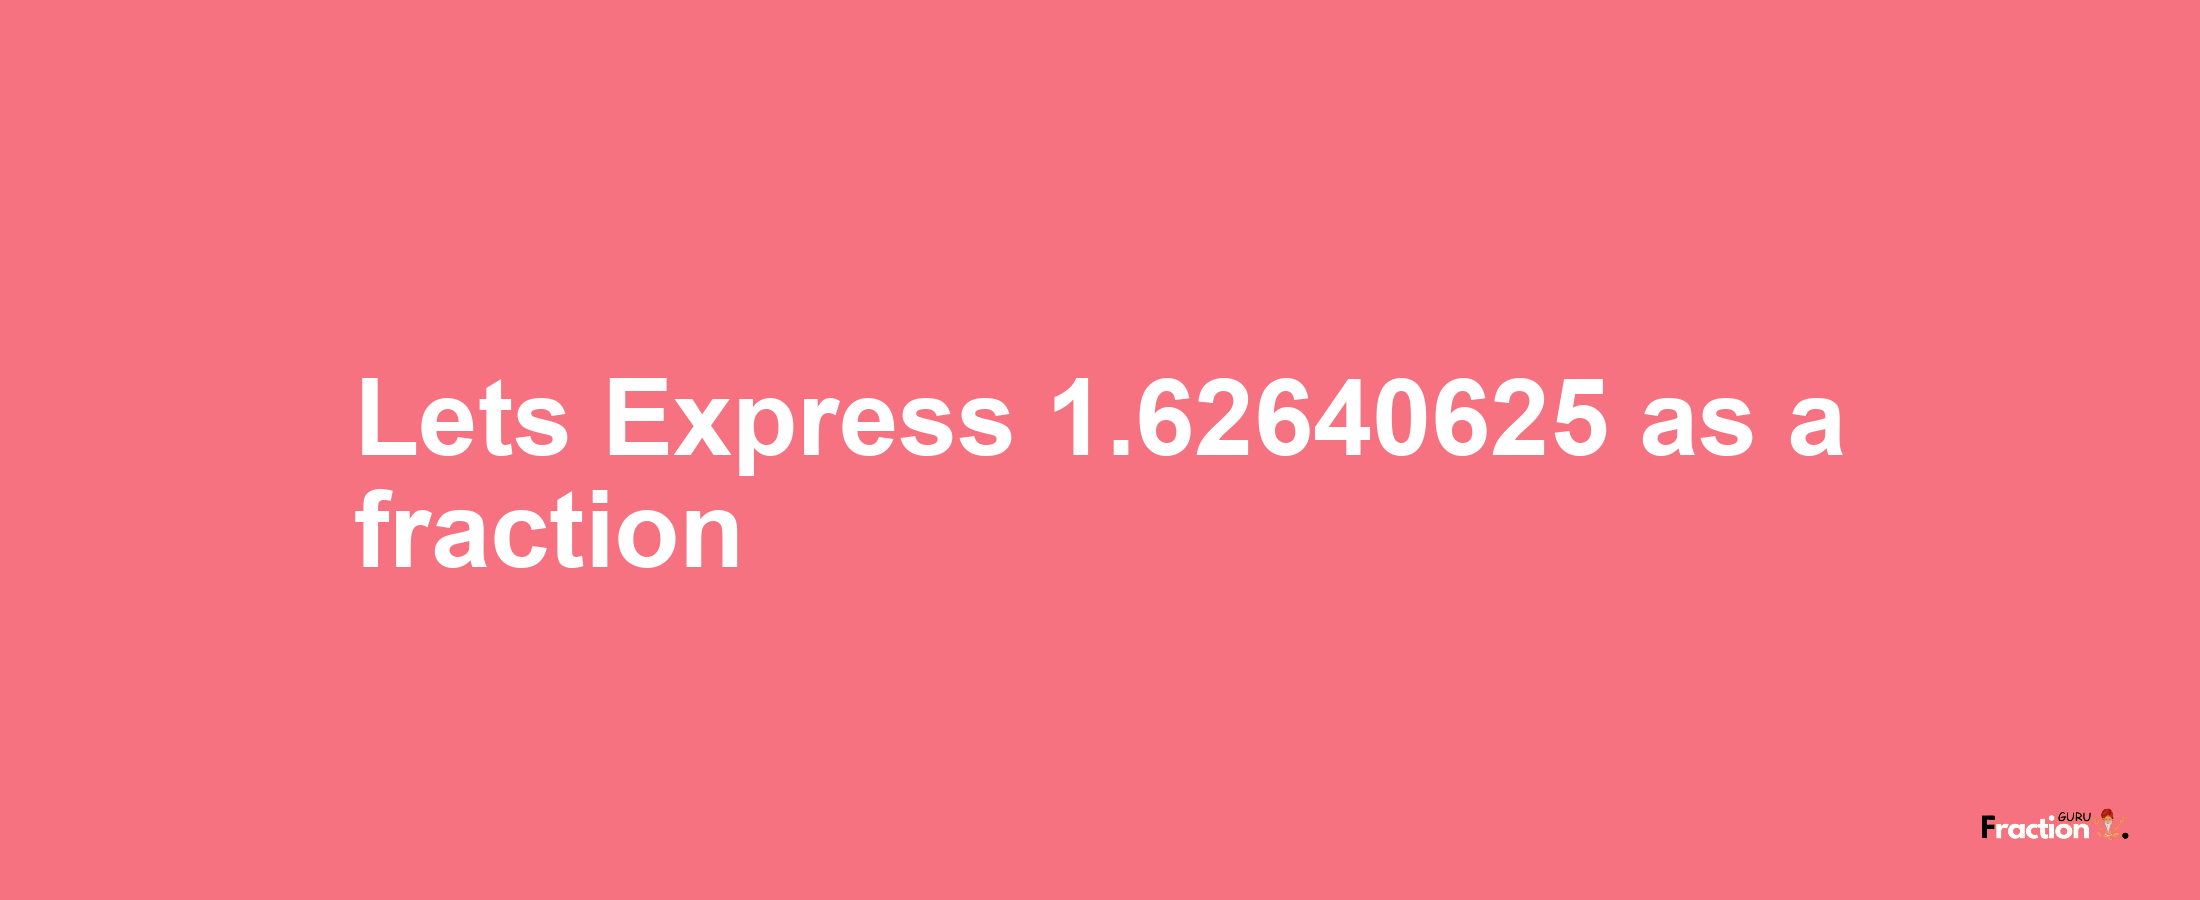 Lets Express 1.62640625 as afraction